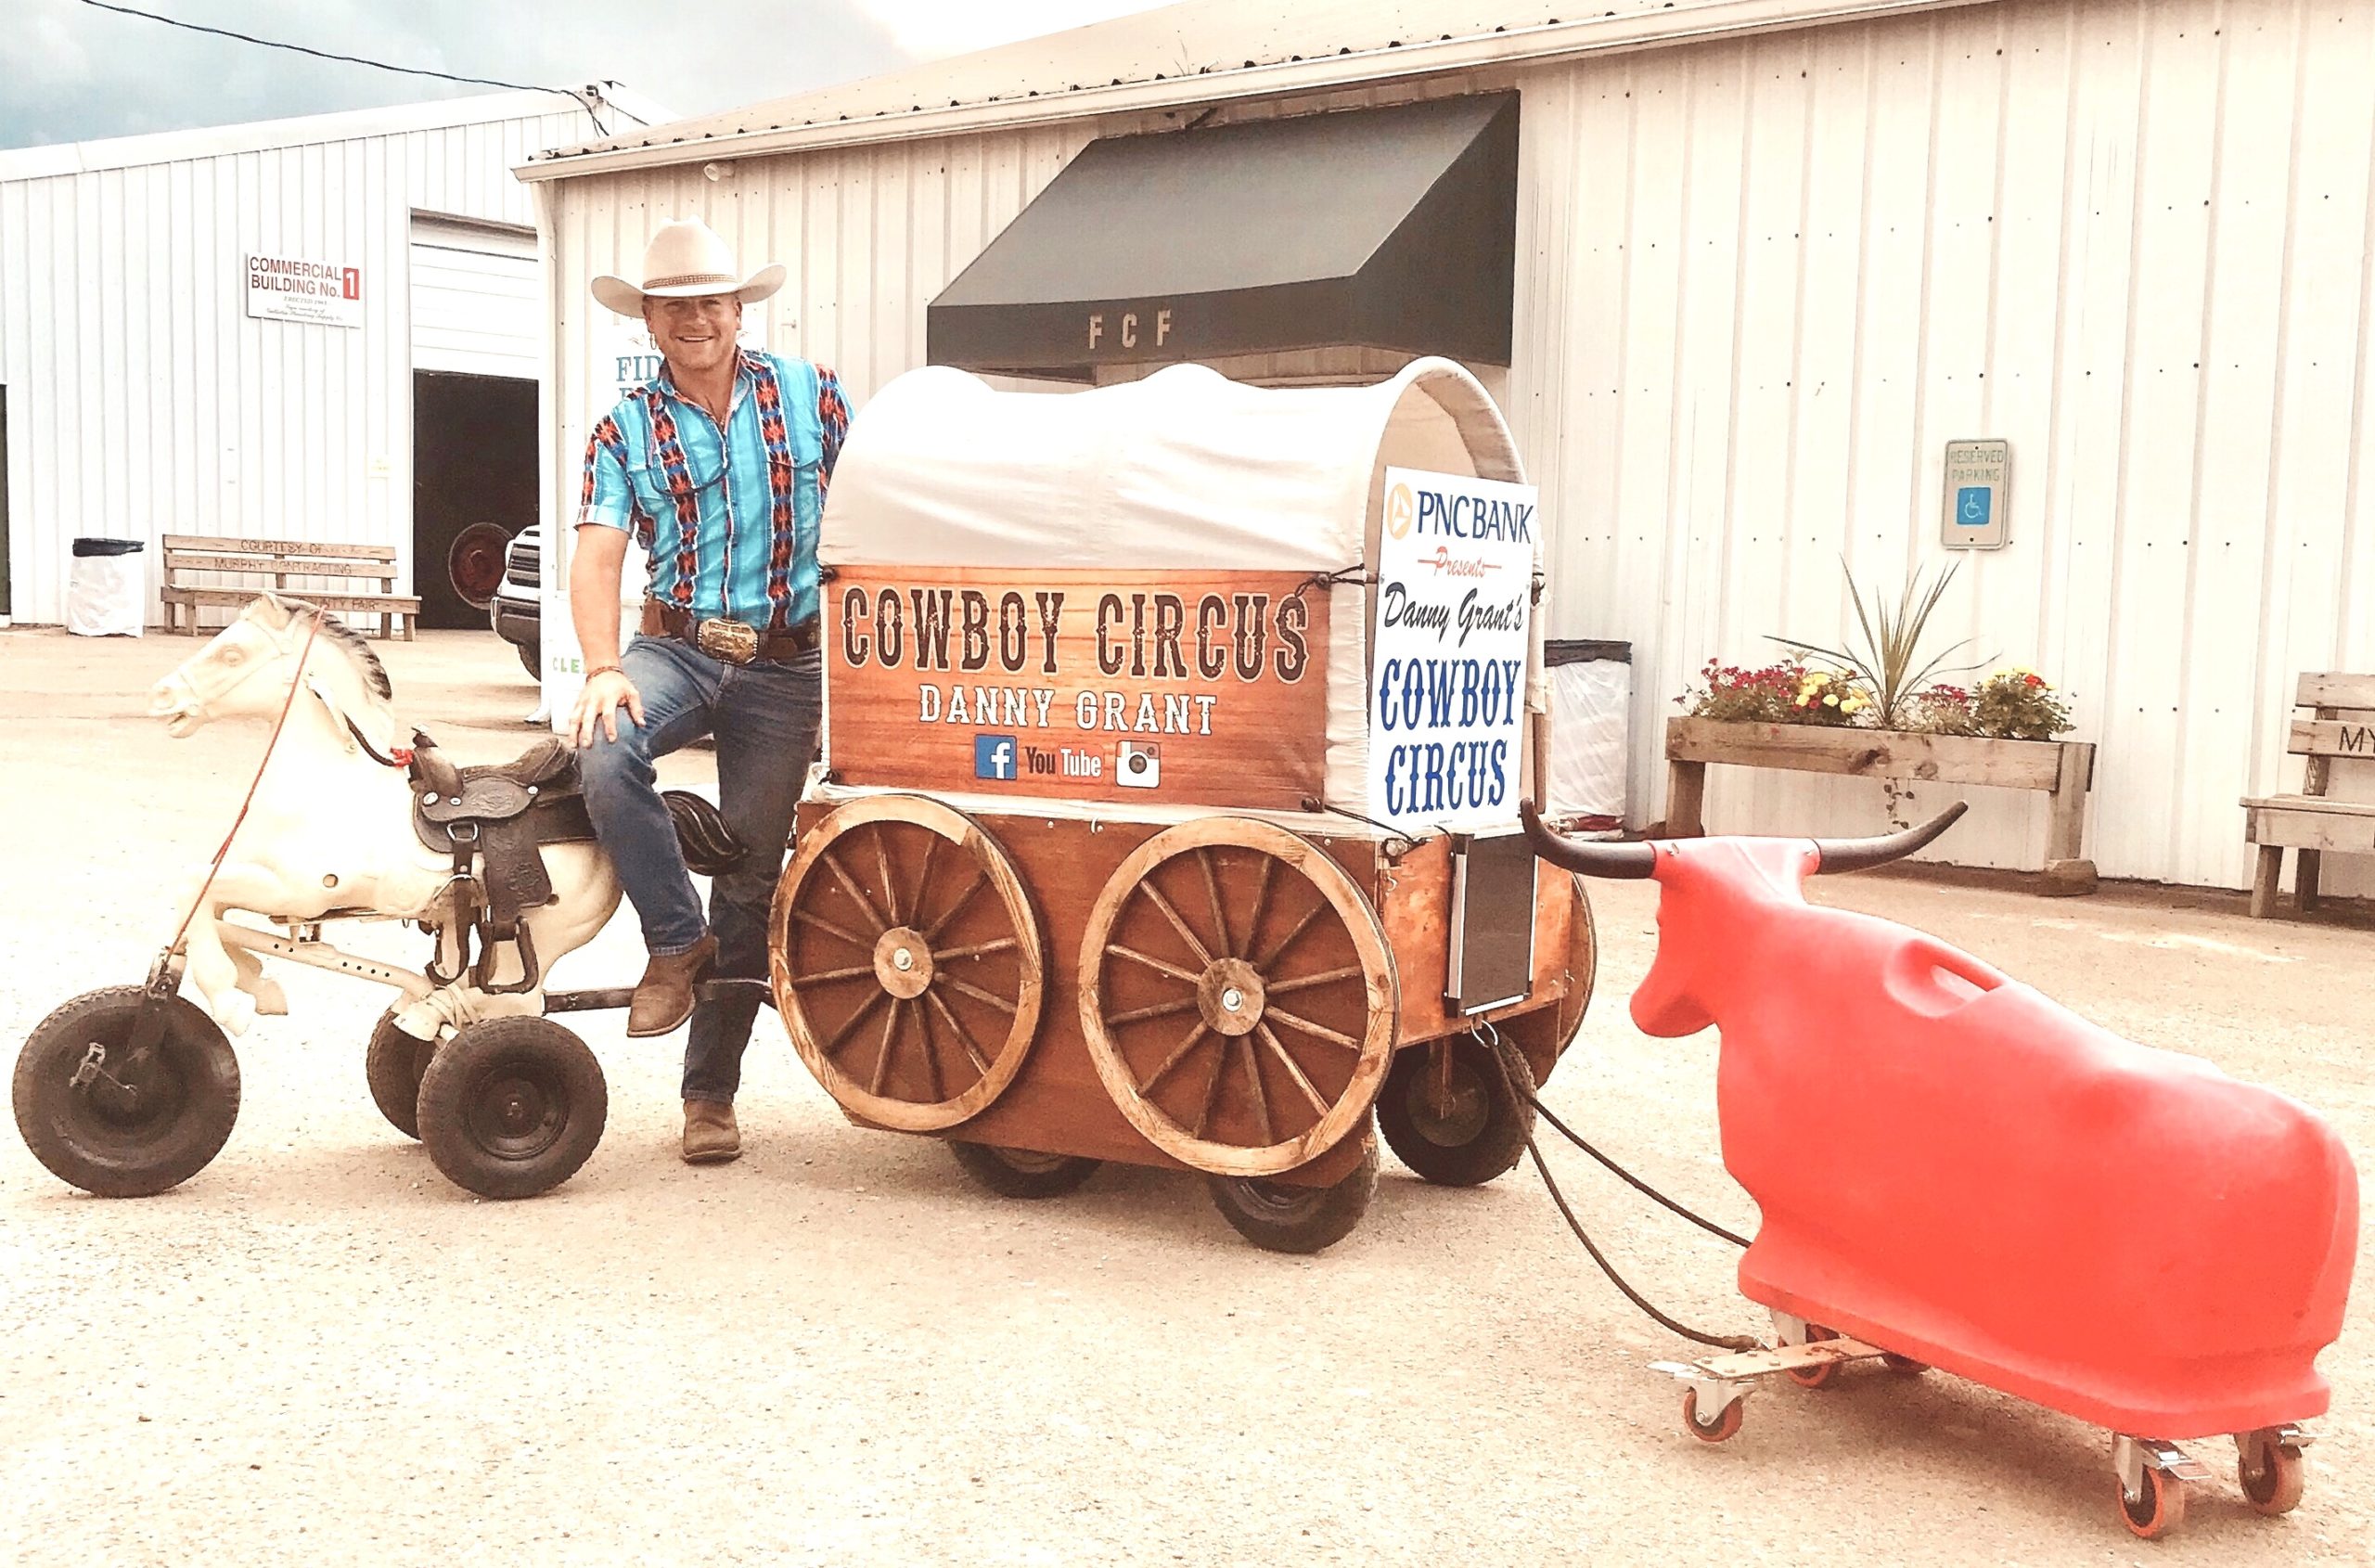 Cowboy Circus with Danny Grant